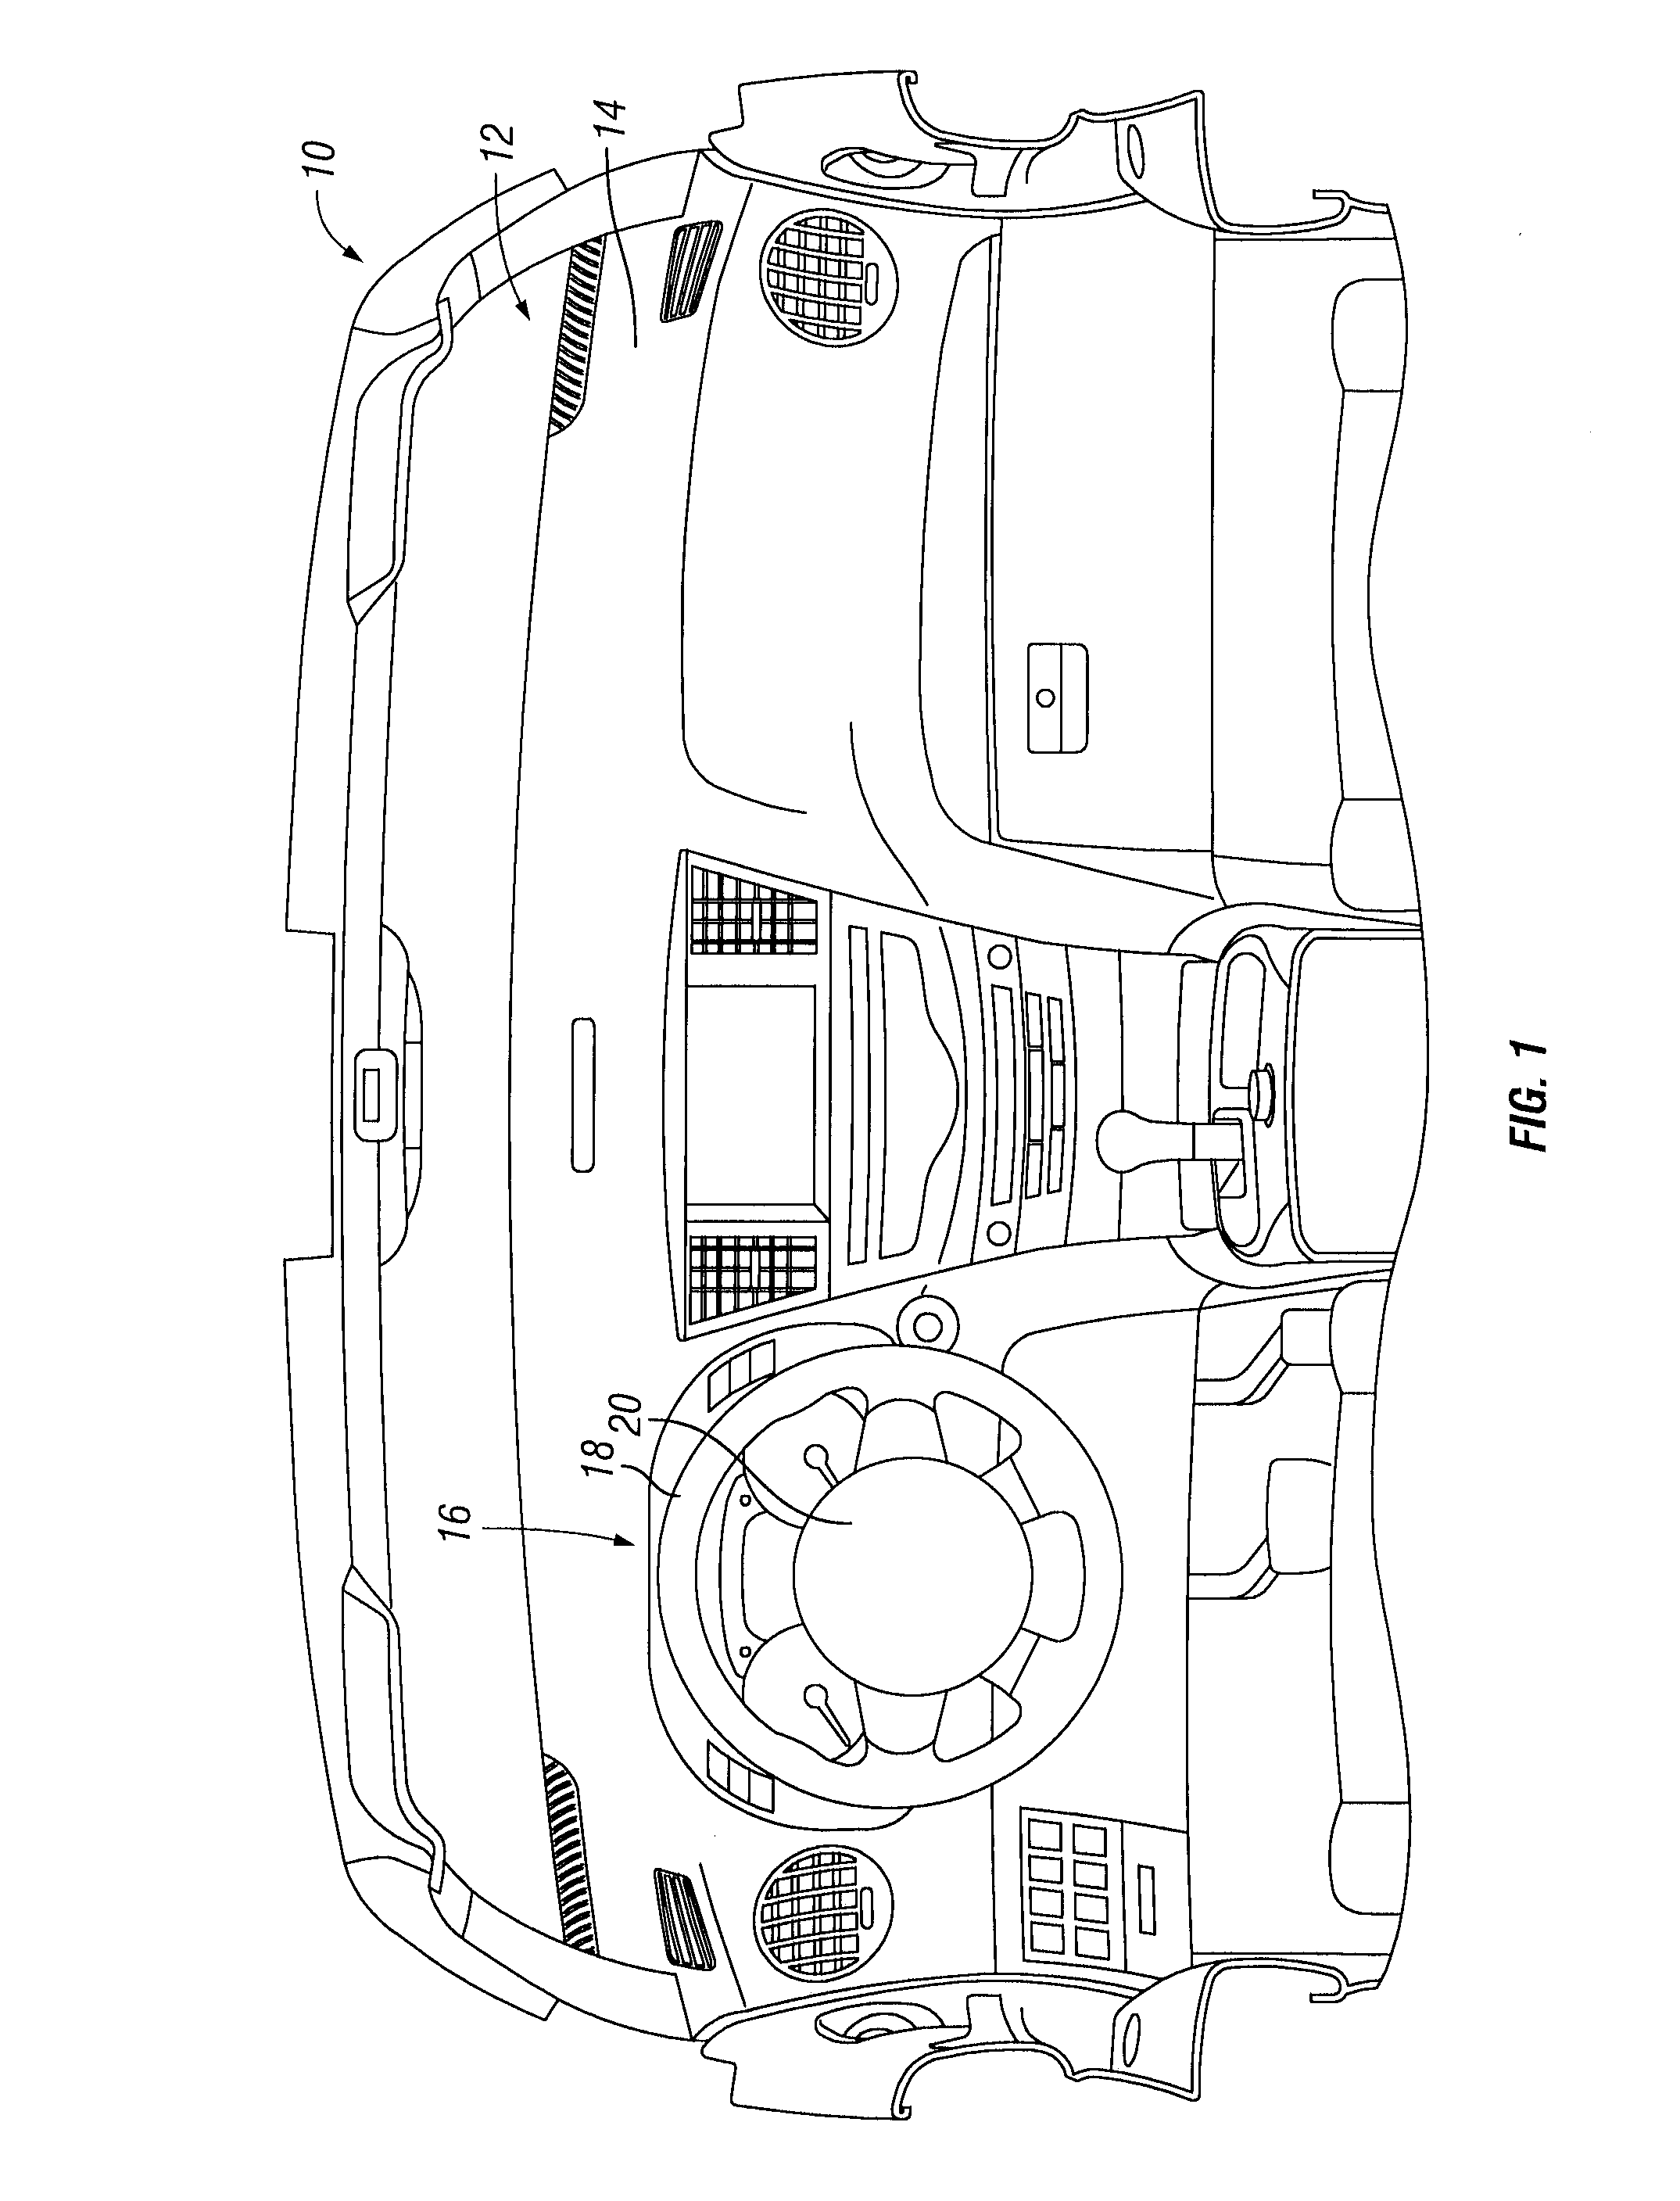 Vehicle horn control assembly